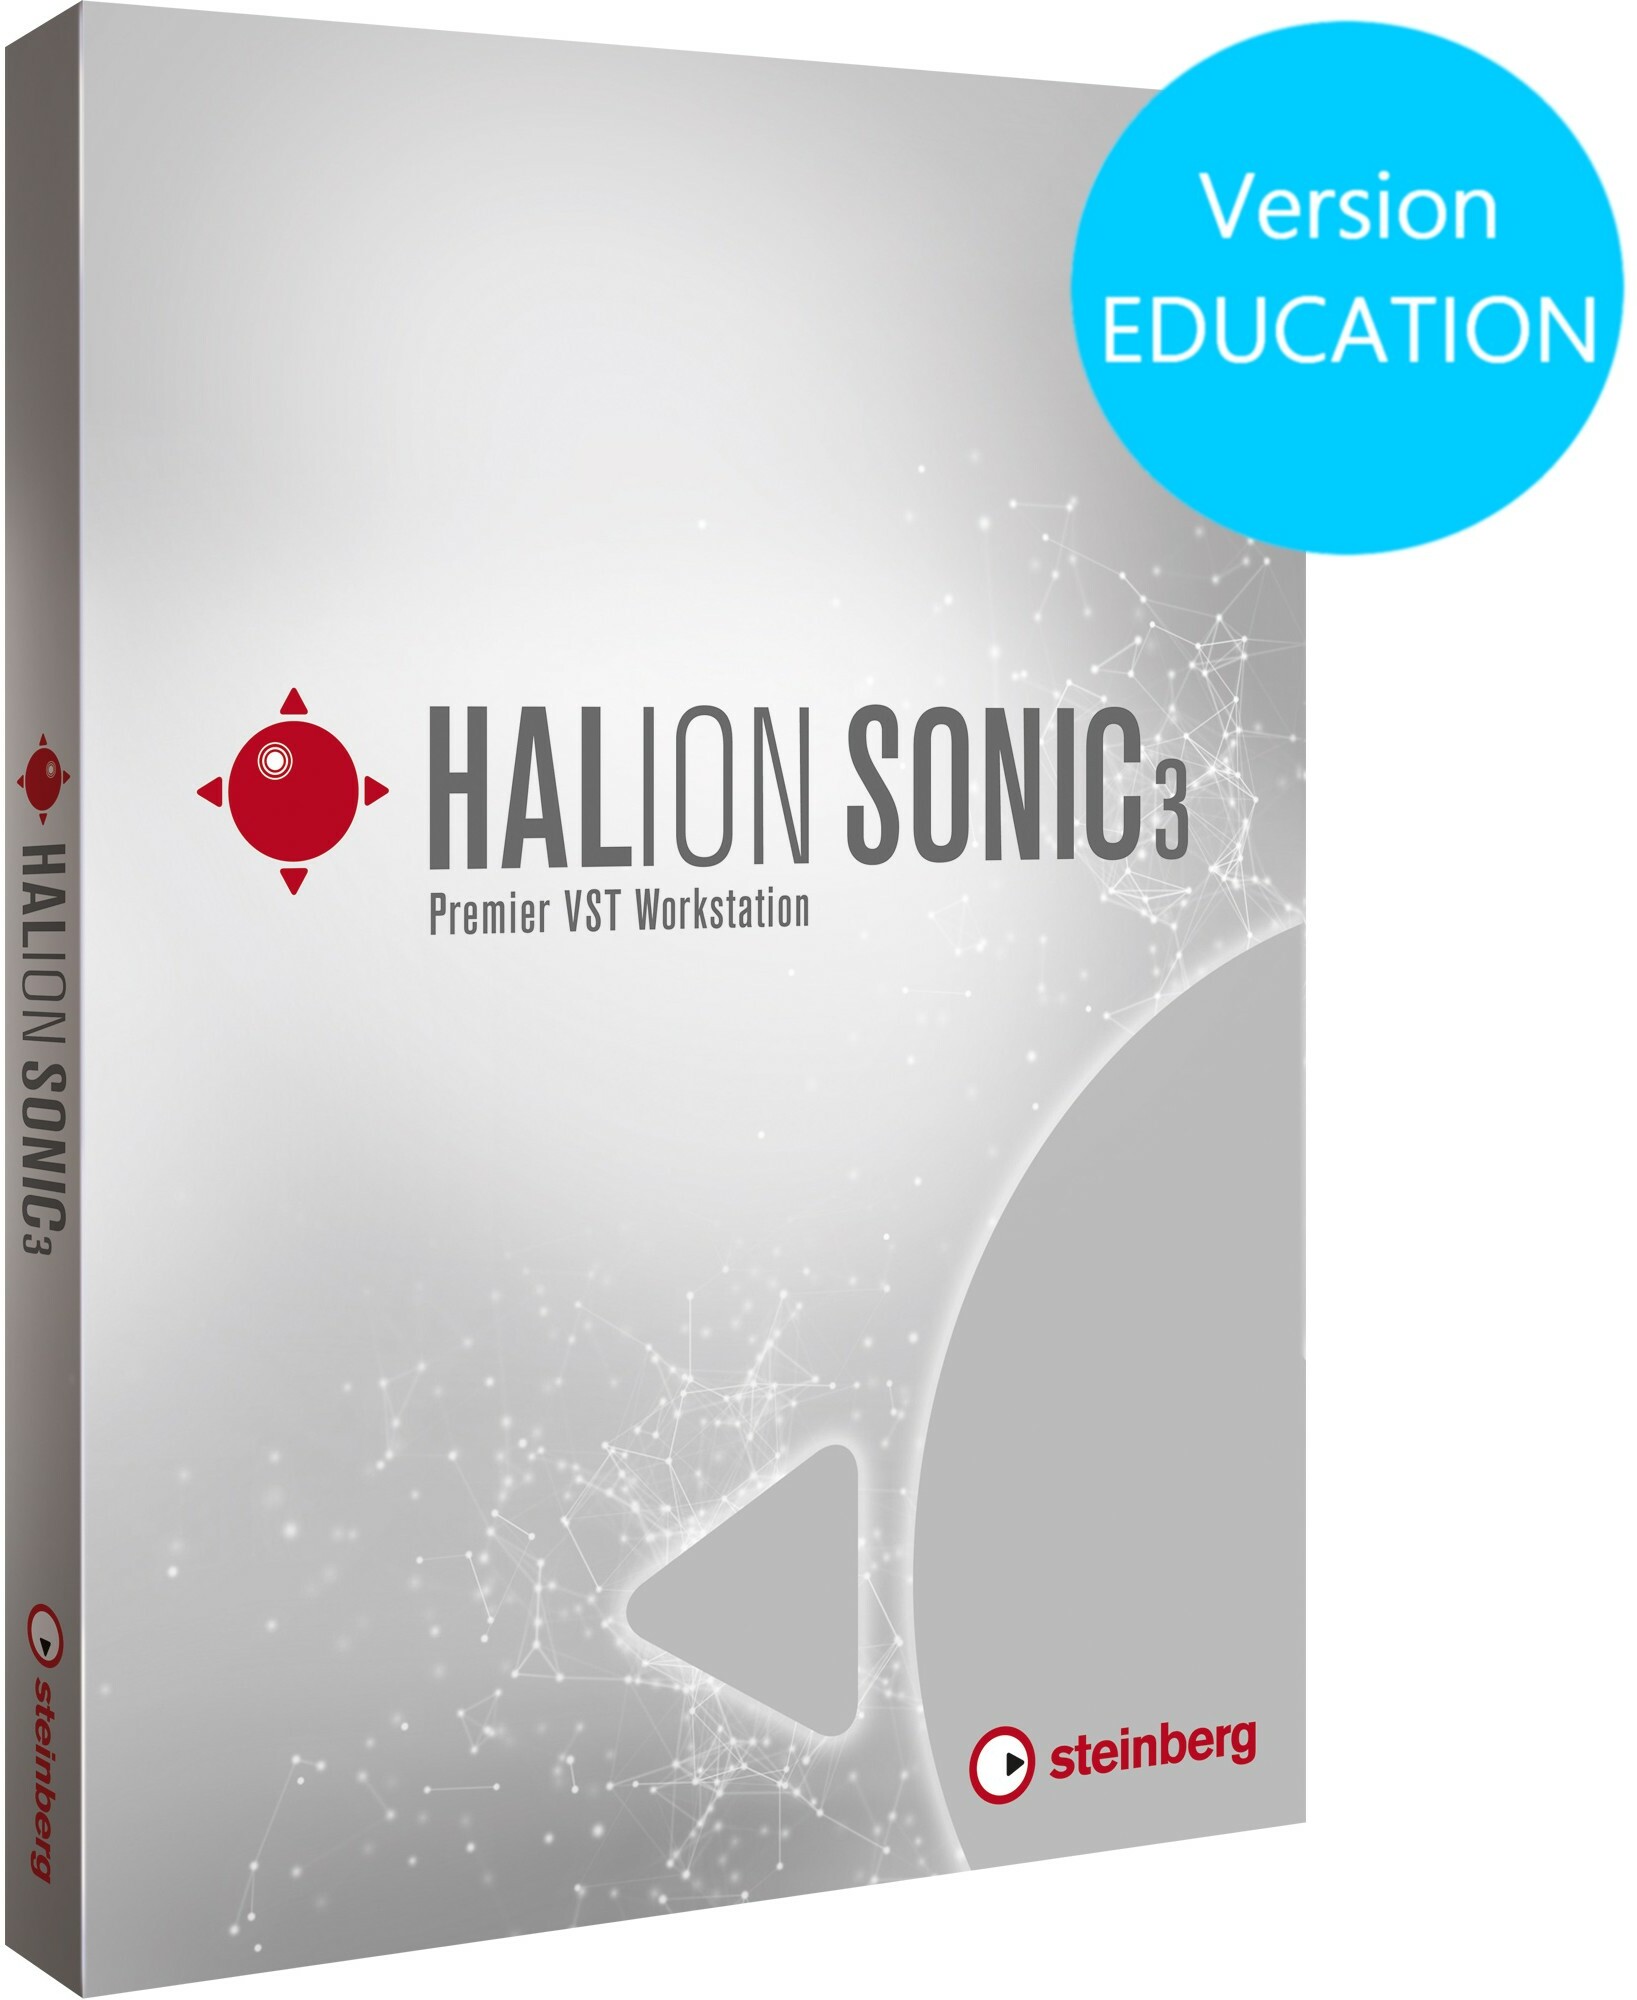 Steinberg Halion Sonic 3 Education - Sound Librerias y sample - Main picture